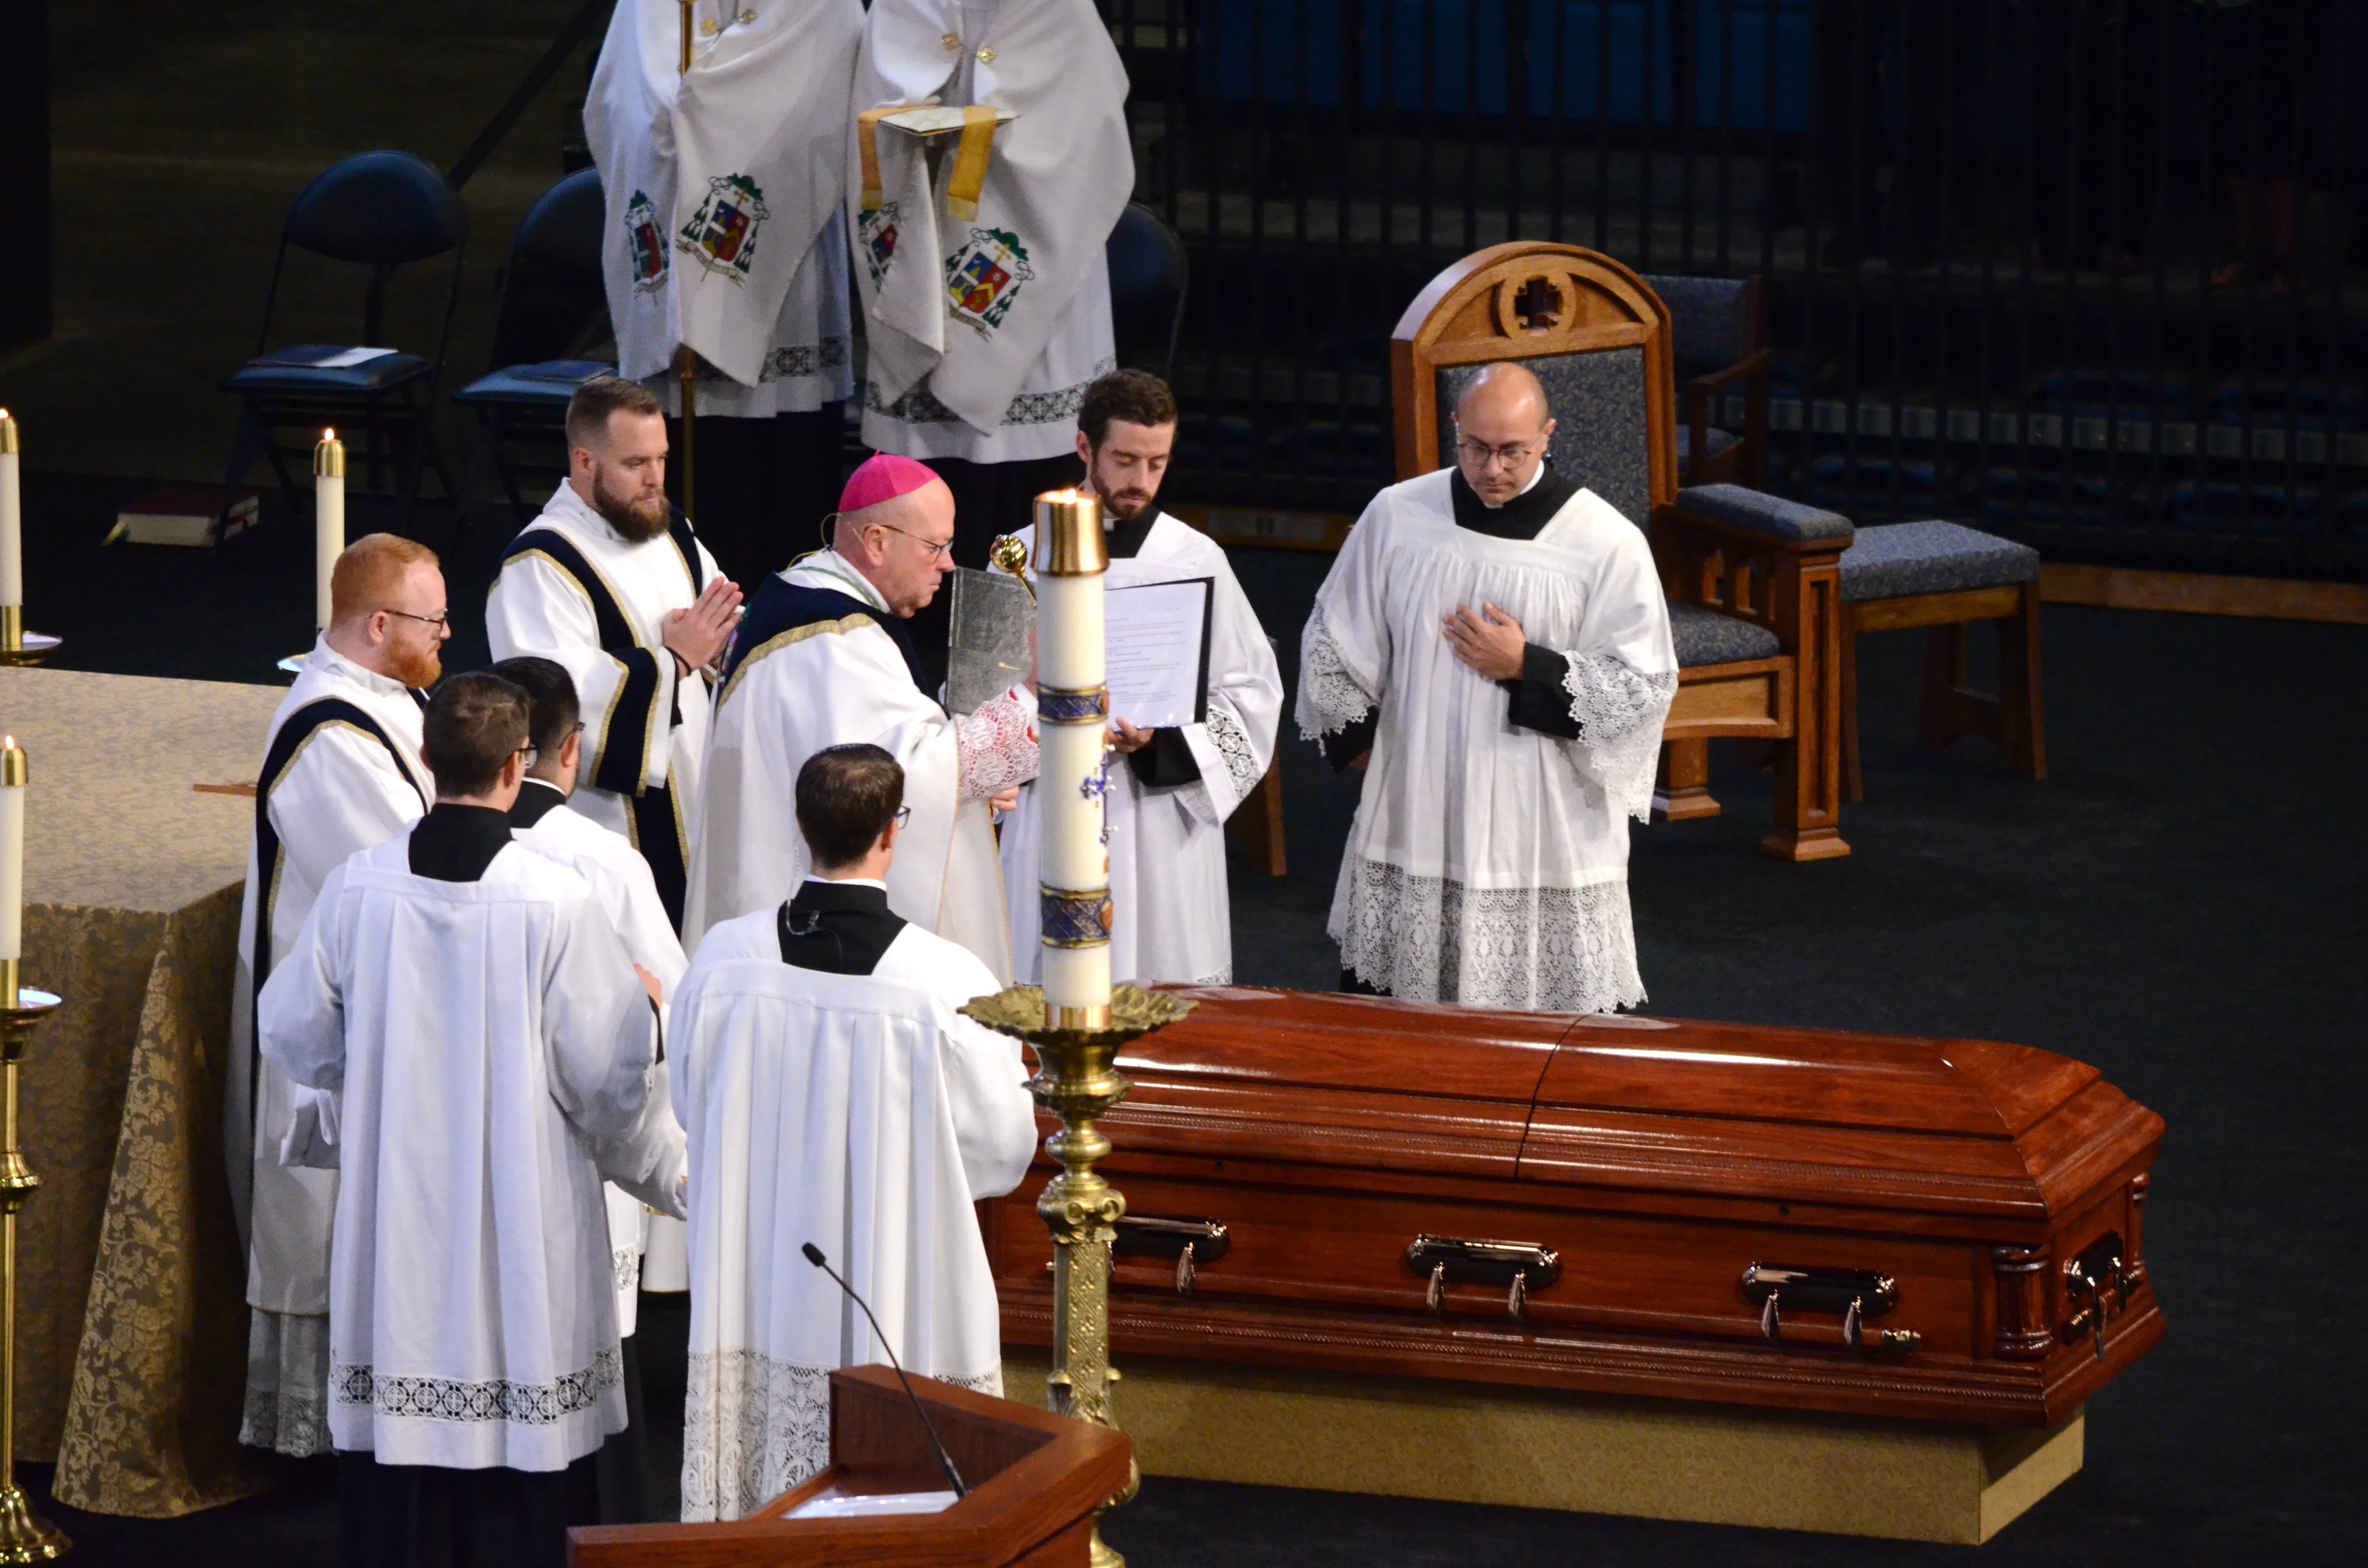 Bishop Carl Kemme of Wichita performs the absolution over the coffin of Father Emil Kapaun after his funeral Mass at Hartman Arena in Park City, Kan., Sept. 29, 2021.?w=200&h=150